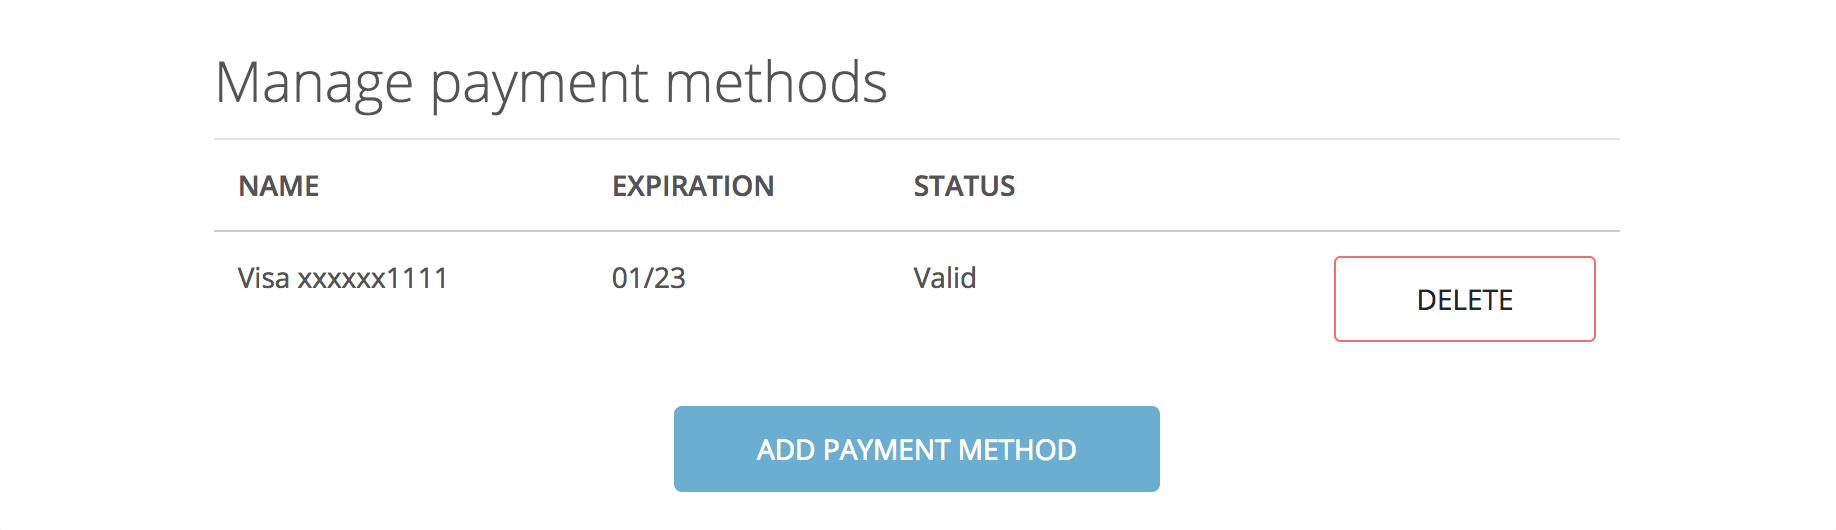 Manage_Payment_Methods.png